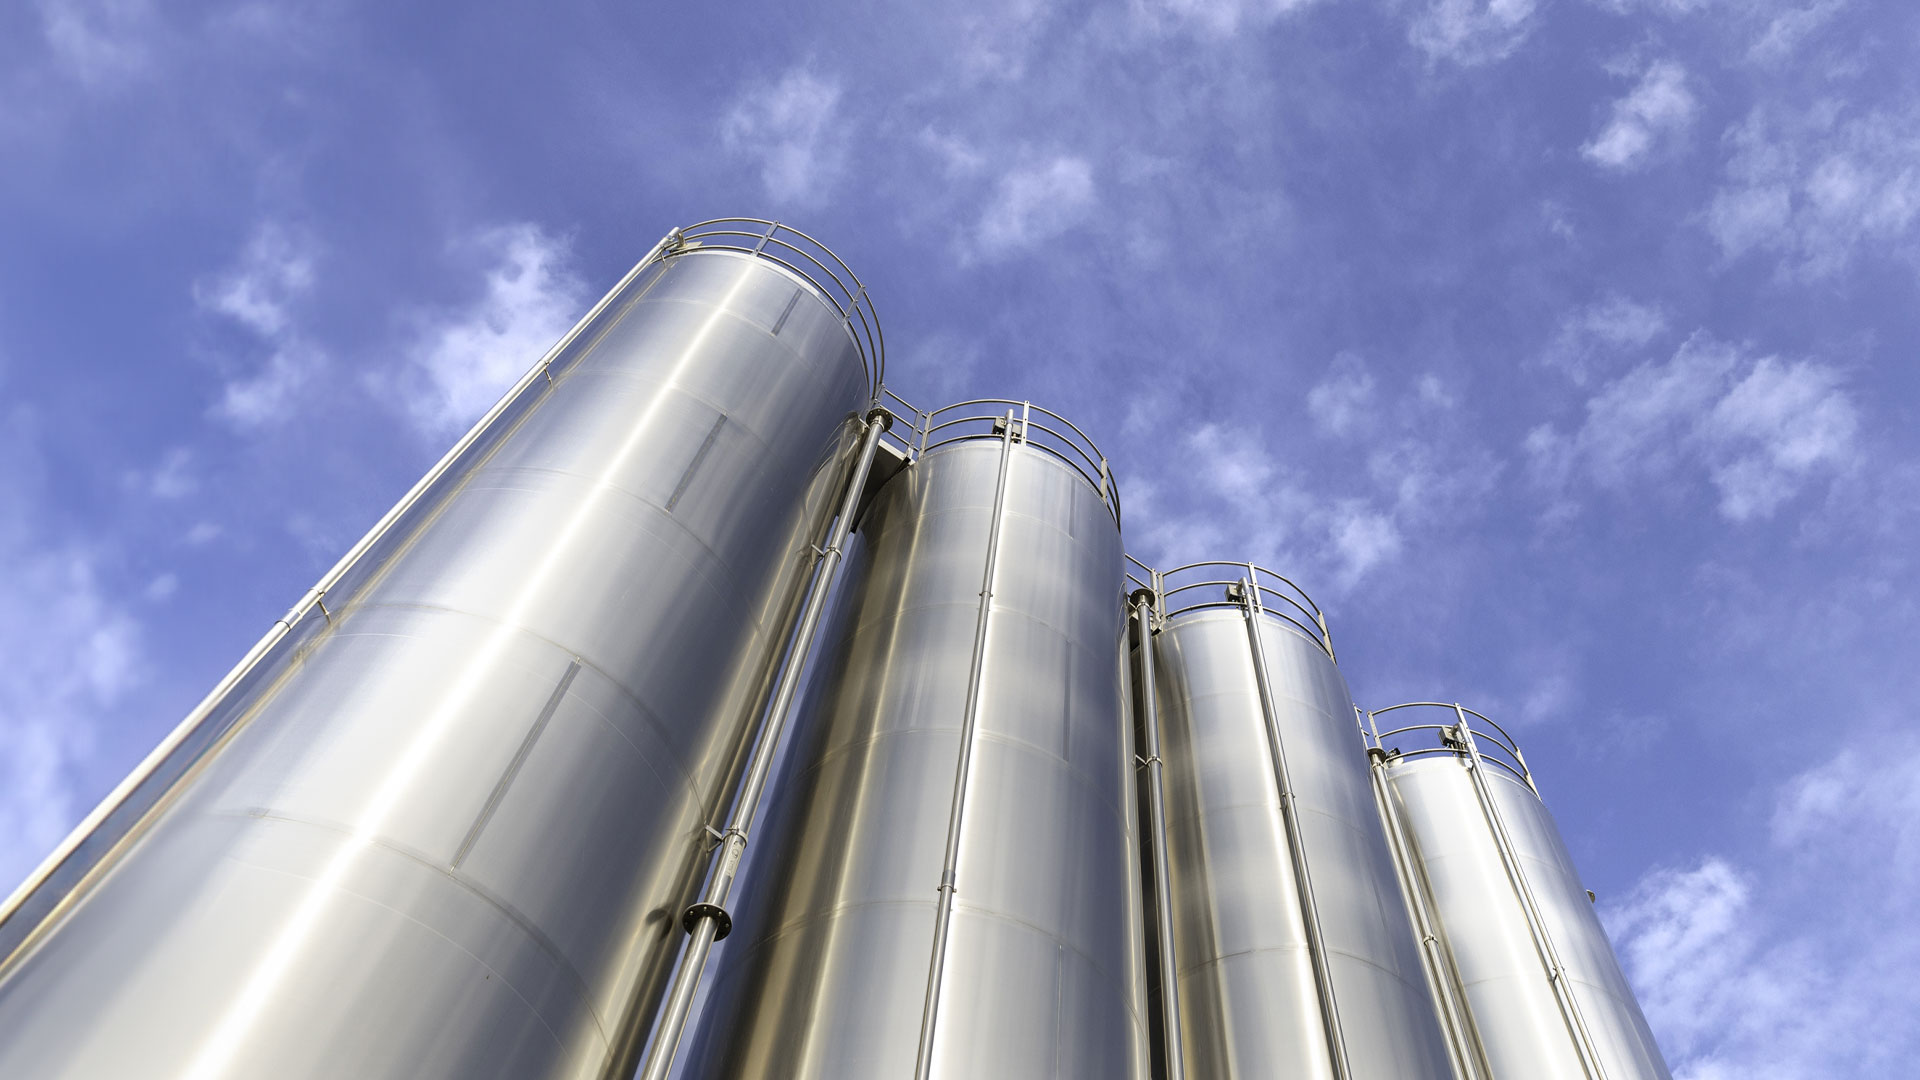 Outdoor silos in stainless steel